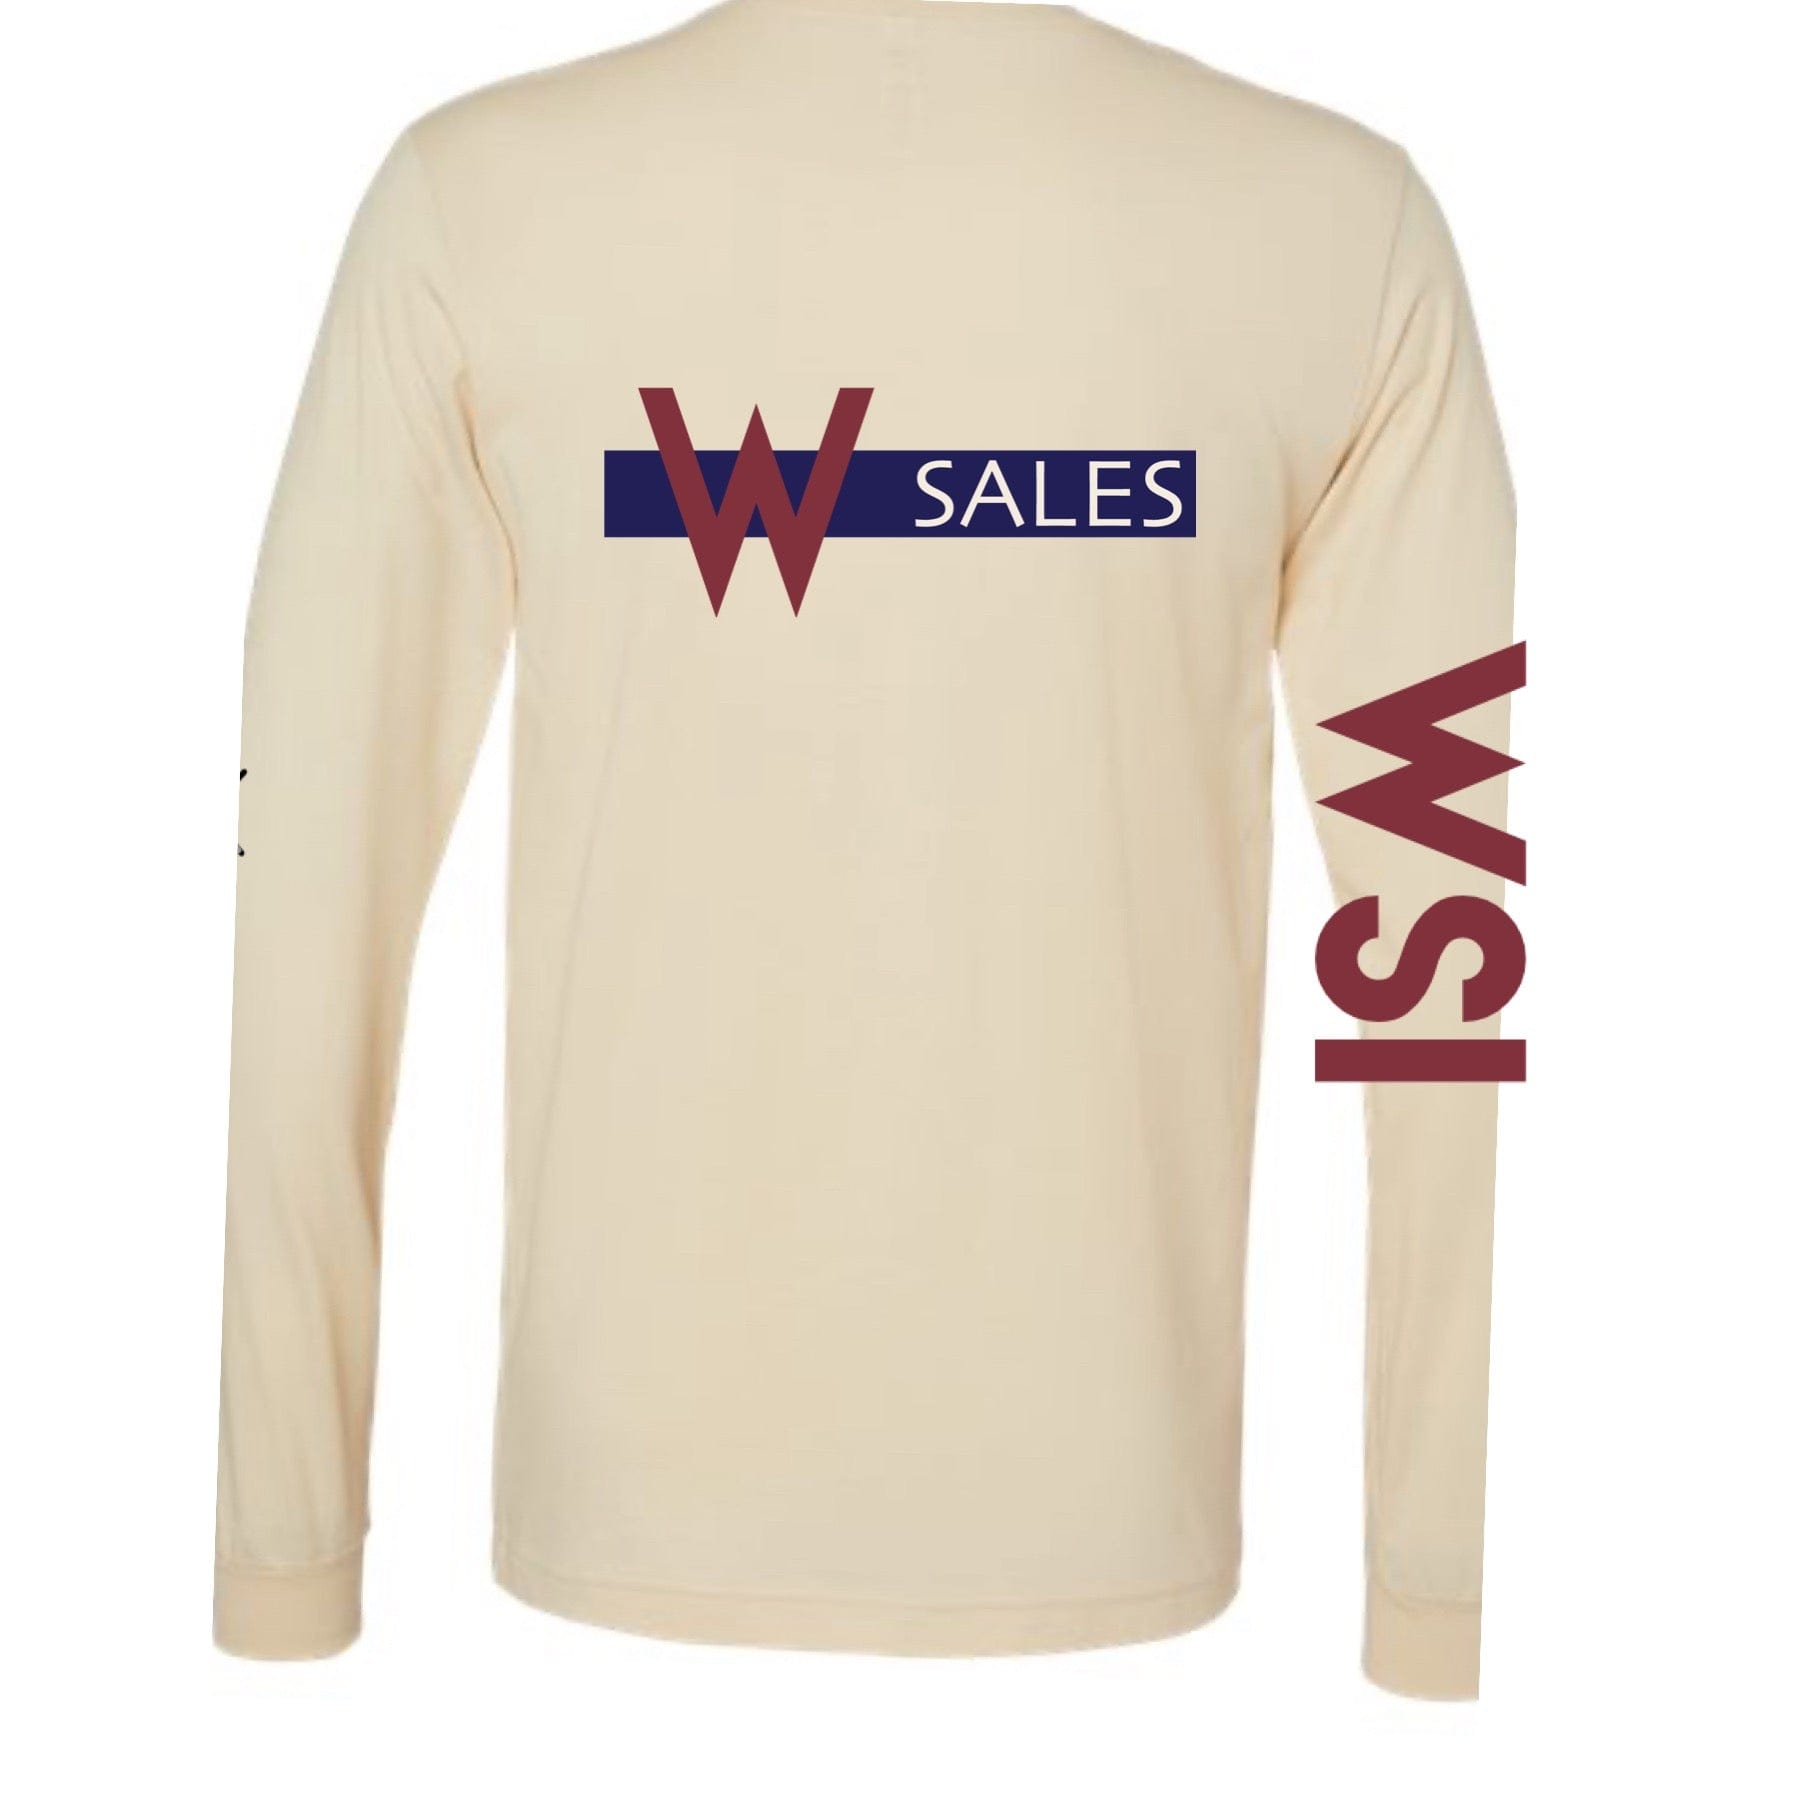 Equestrian Team Apparel WSI Sales - Sun Shirts (Ladies) equestrian team apparel online tack store mobile tack store custom farm apparel custom show stable clothing equestrian lifestyle horse show clothing riding clothes horses equestrian tack store